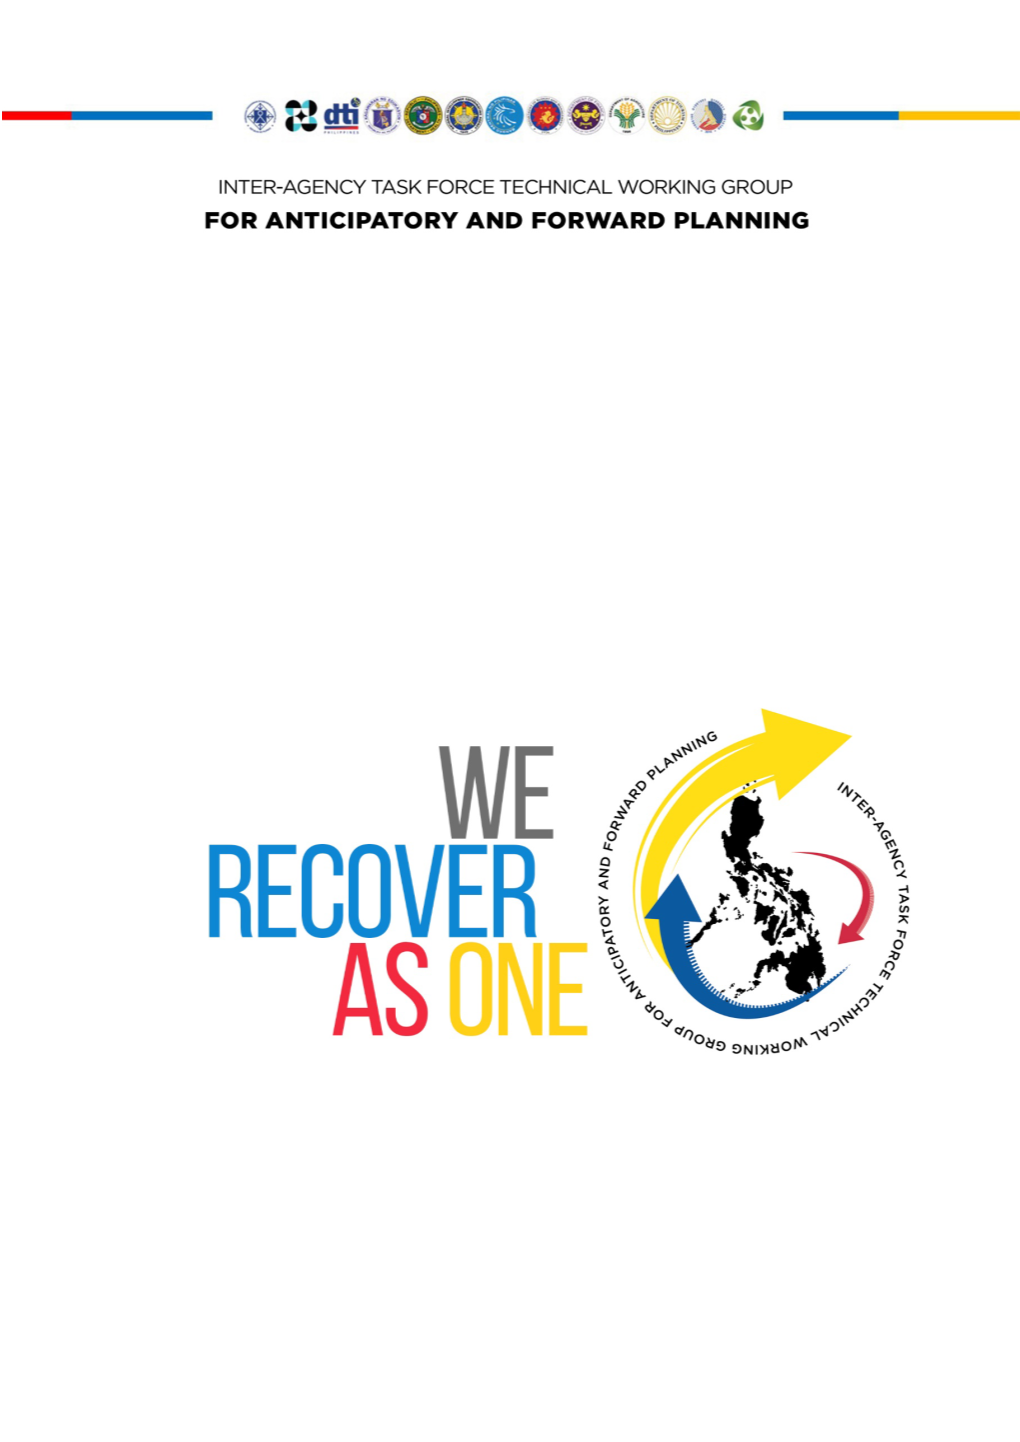 We Recover As One” to Convey the Message of Solidarity, and More Importantly, to Bring the Locus of Control Back to Us – Individuals, Community, and Society